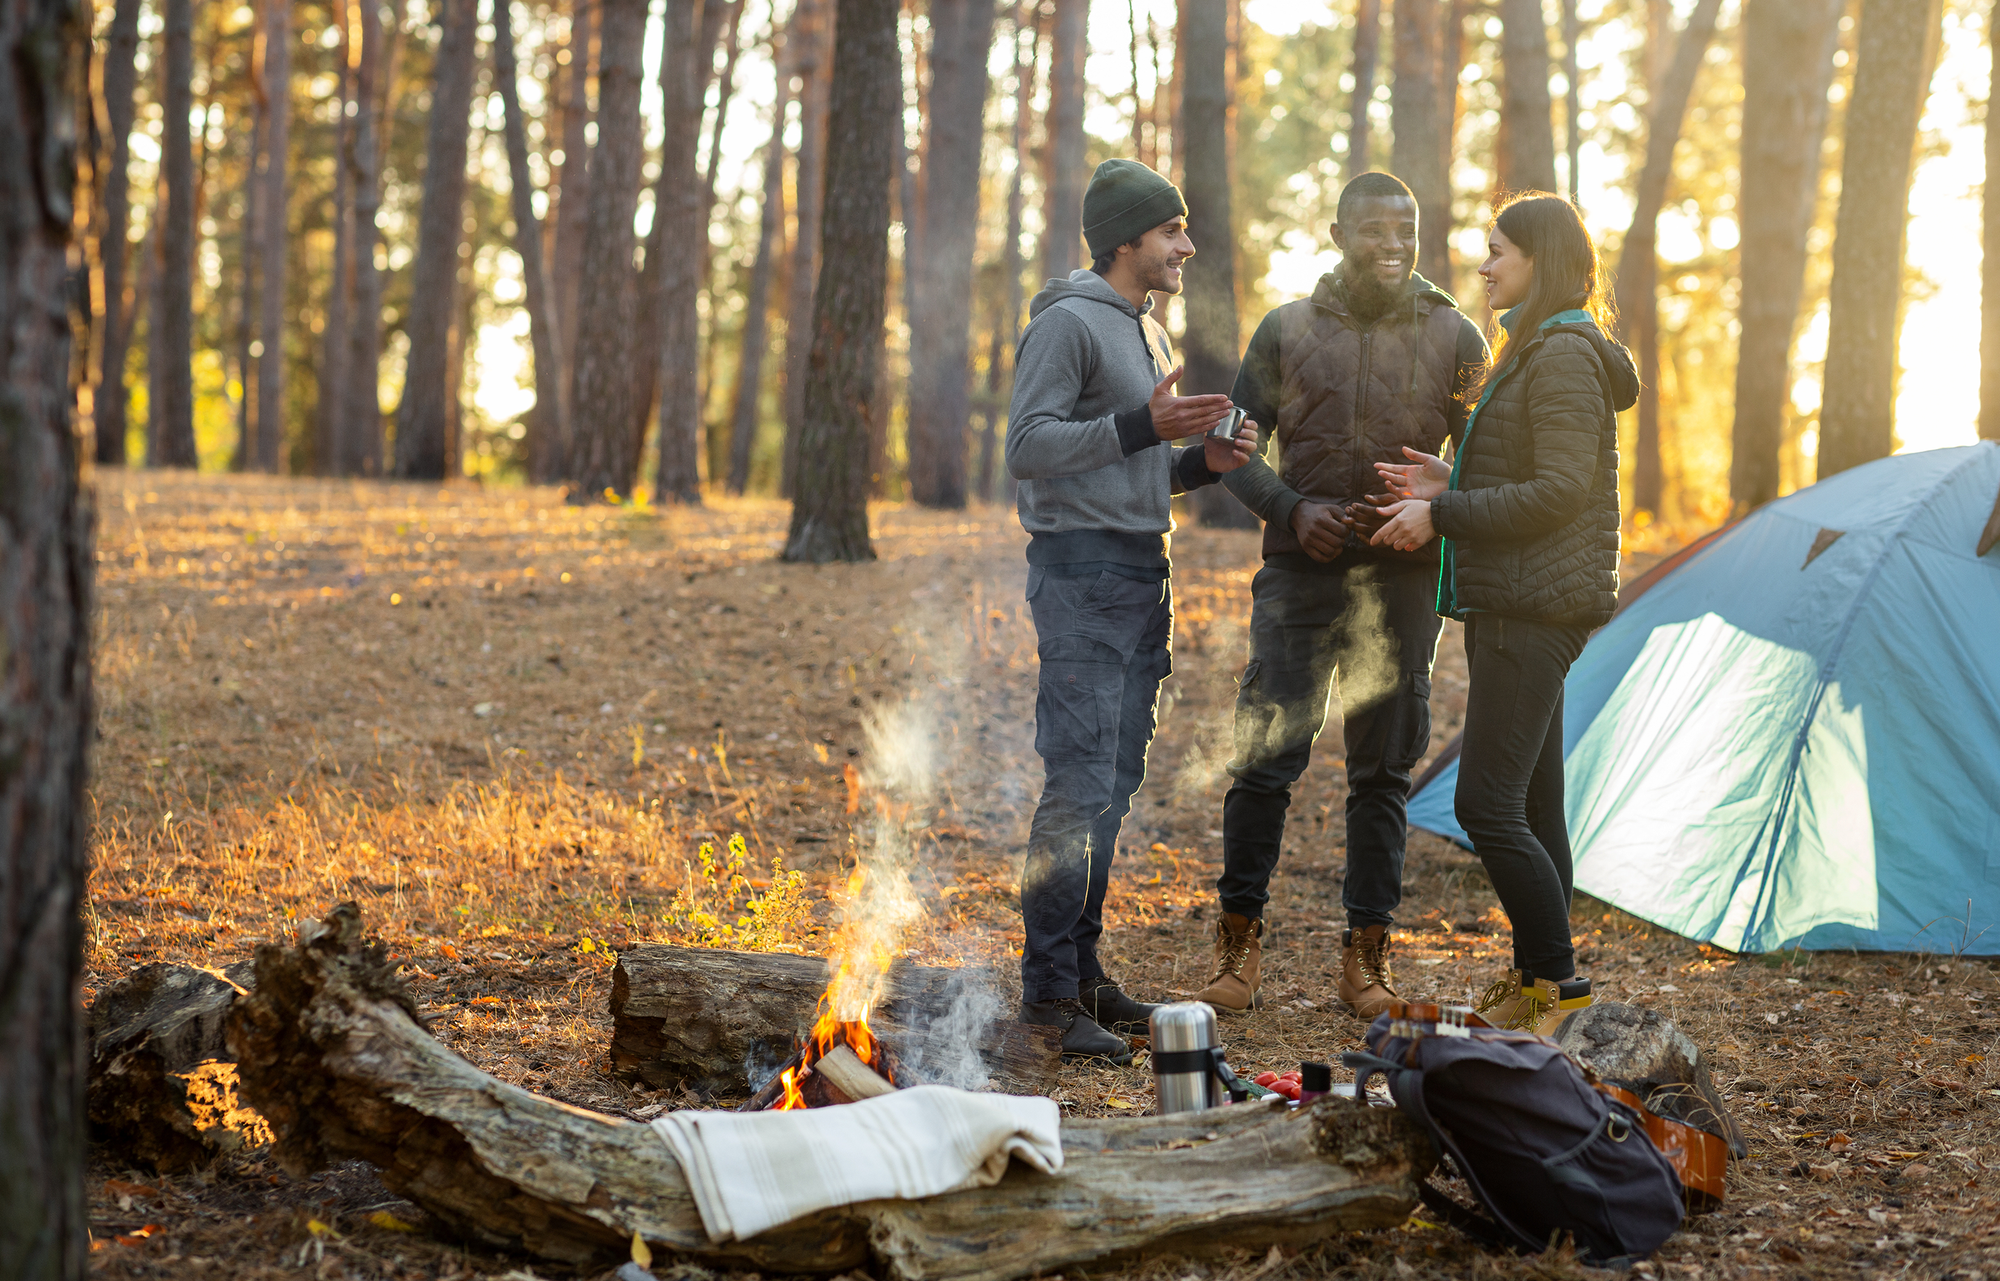 10 Camping Essentials Every Beginner Needs For Their First Eco-Friendly Adventure